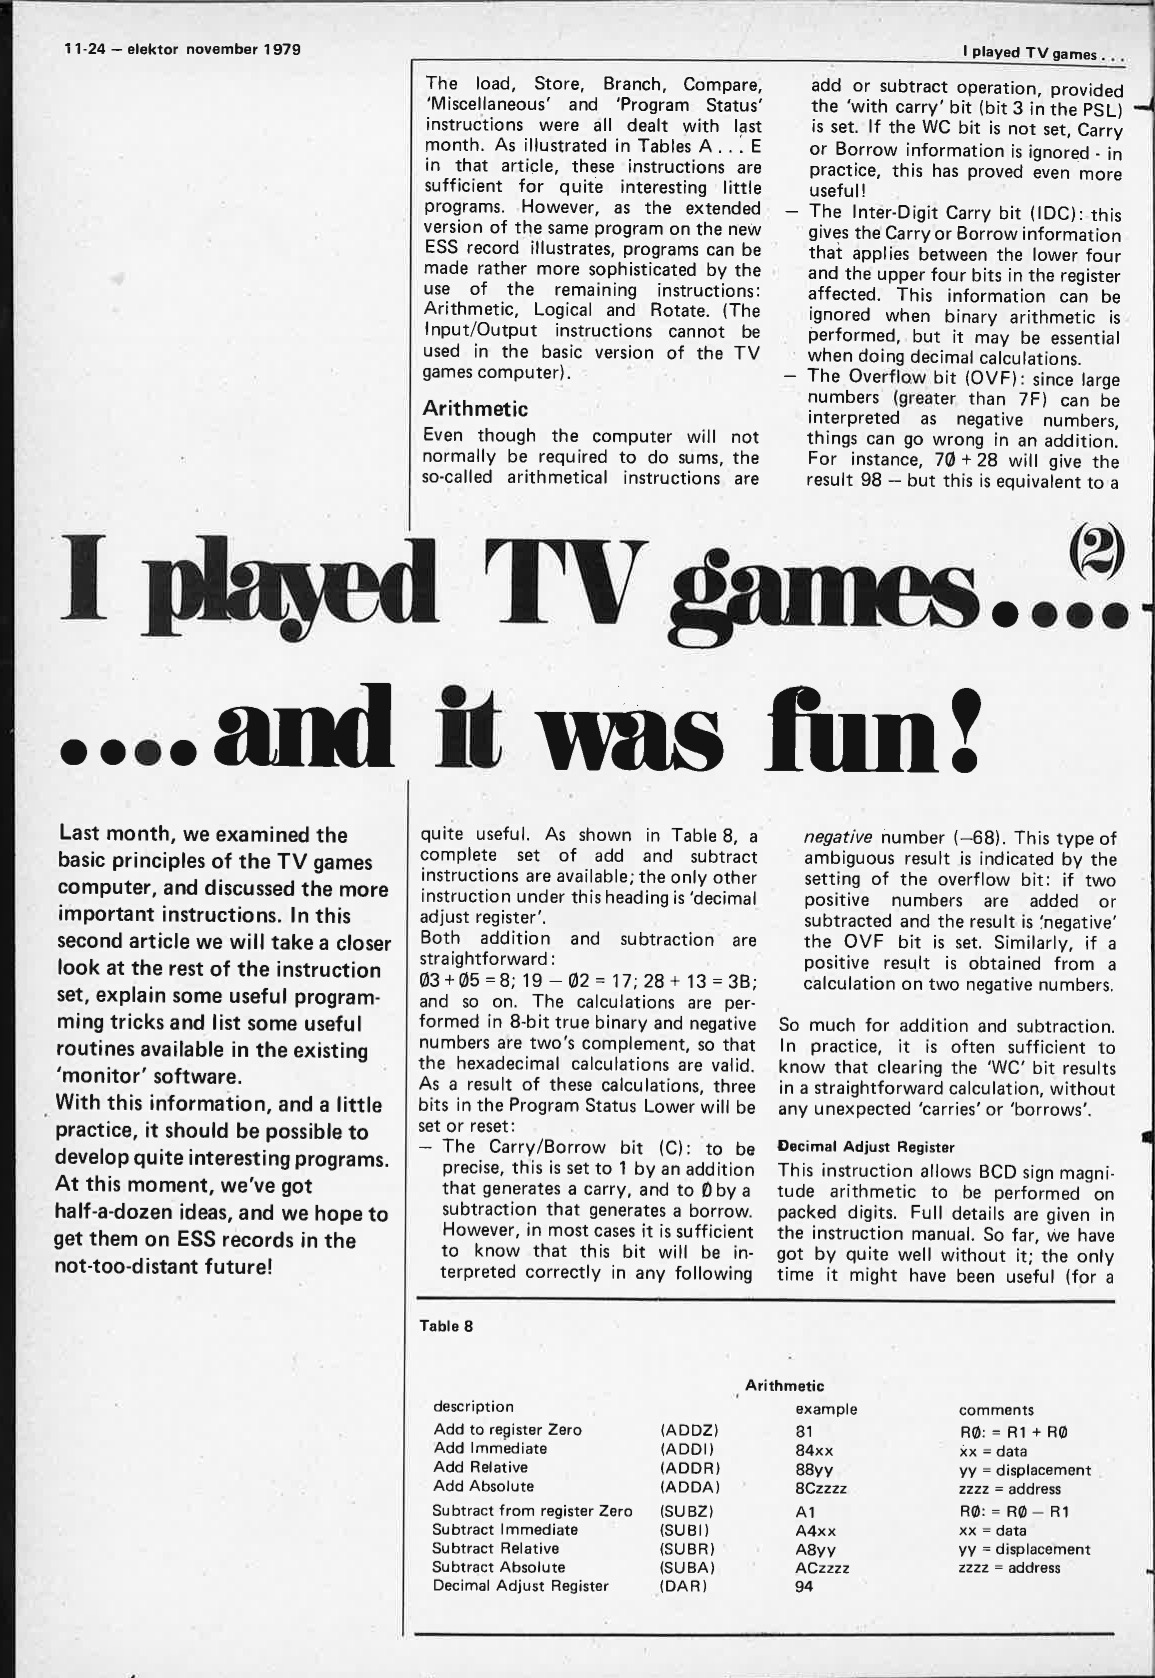 I played TV games (2)